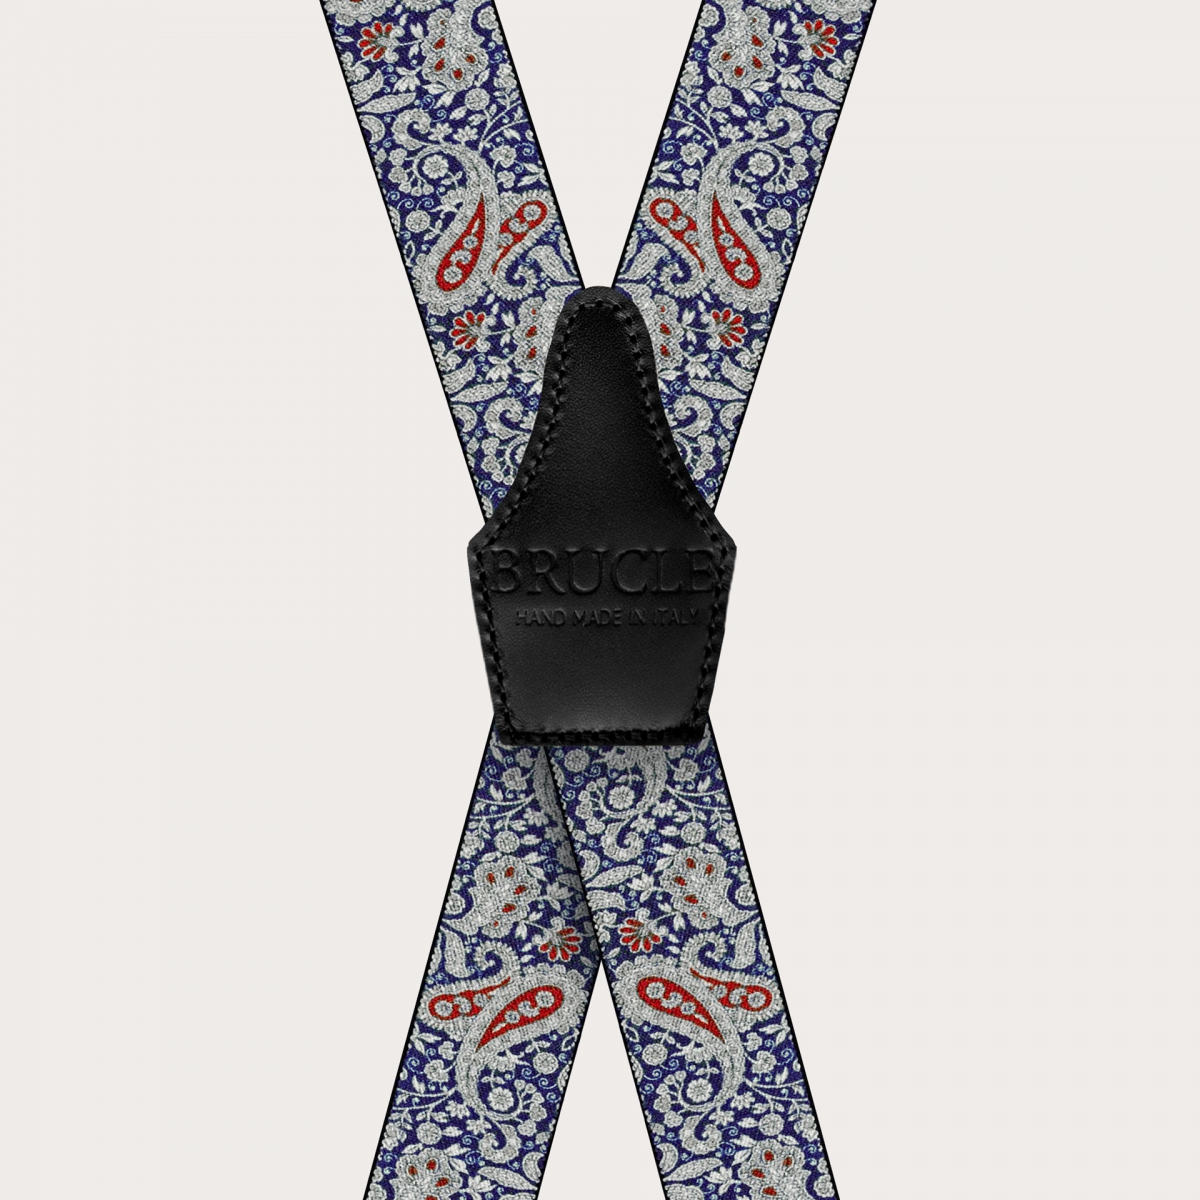 BRUCLE X-shaped suspenders with clips in blue and red cashmere pattern